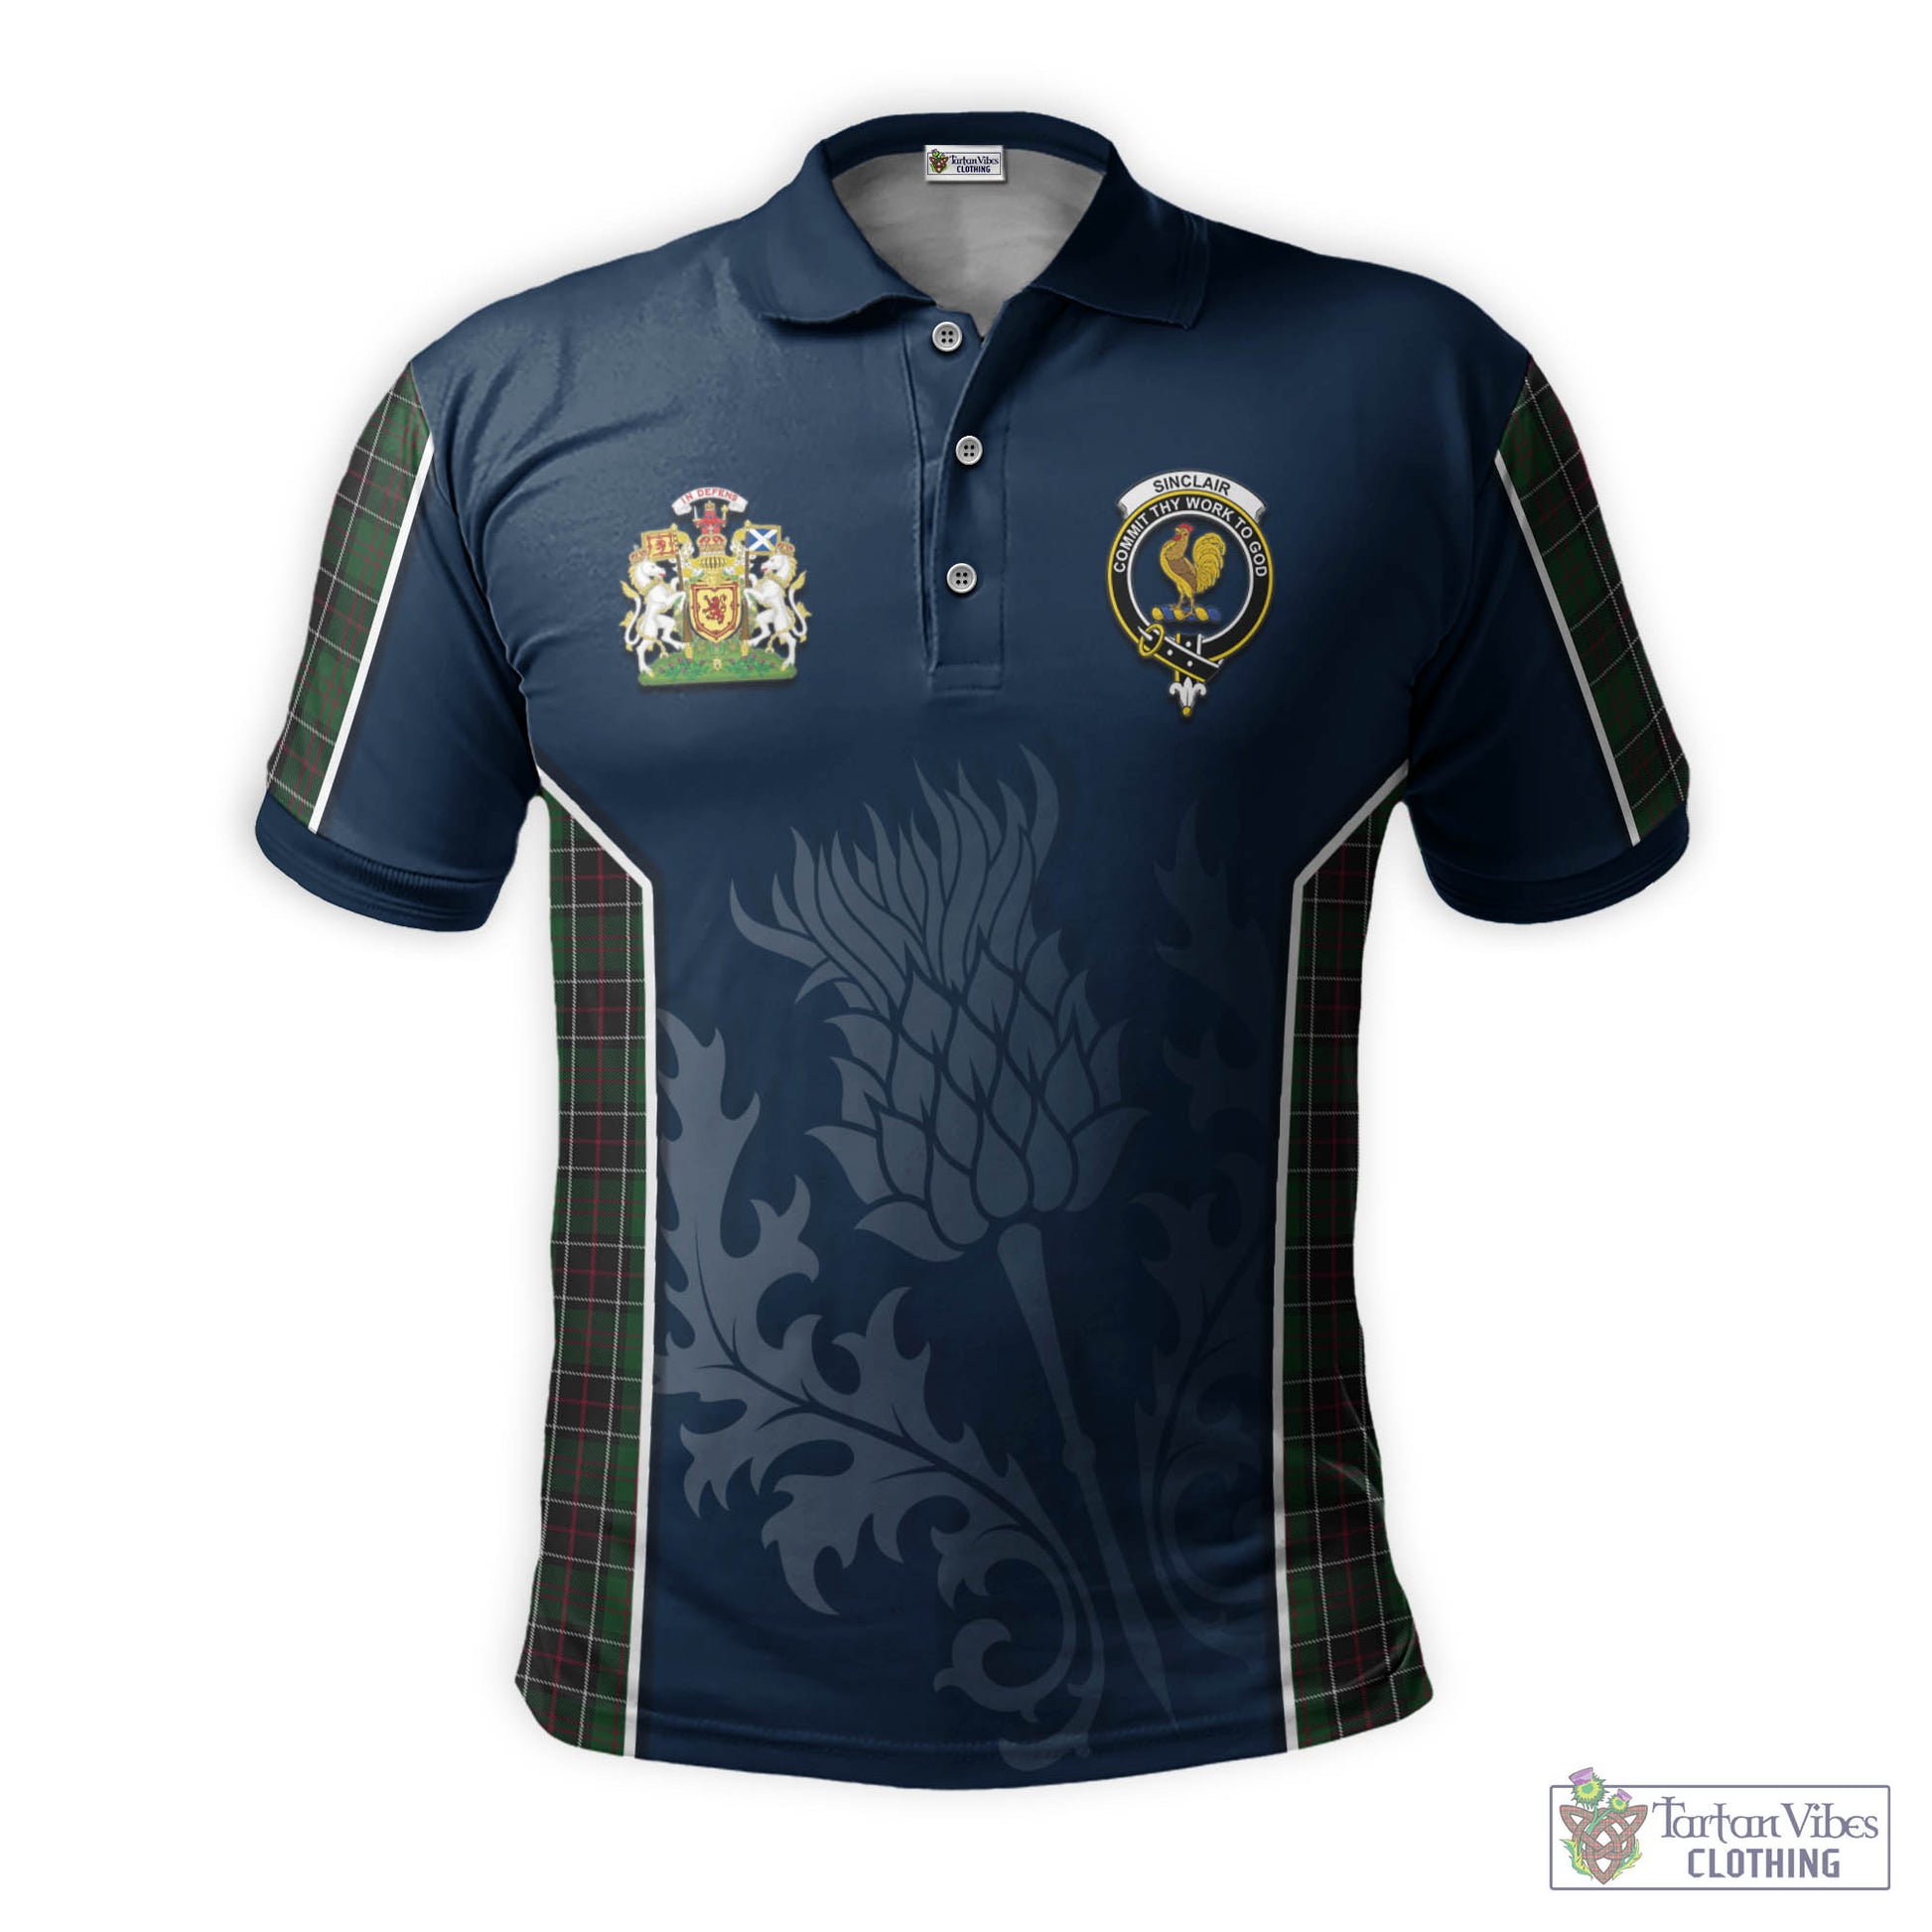 Tartan Vibes Clothing Sinclair Hunting Tartan Men's Polo Shirt with Family Crest and Scottish Thistle Vibes Sport Style